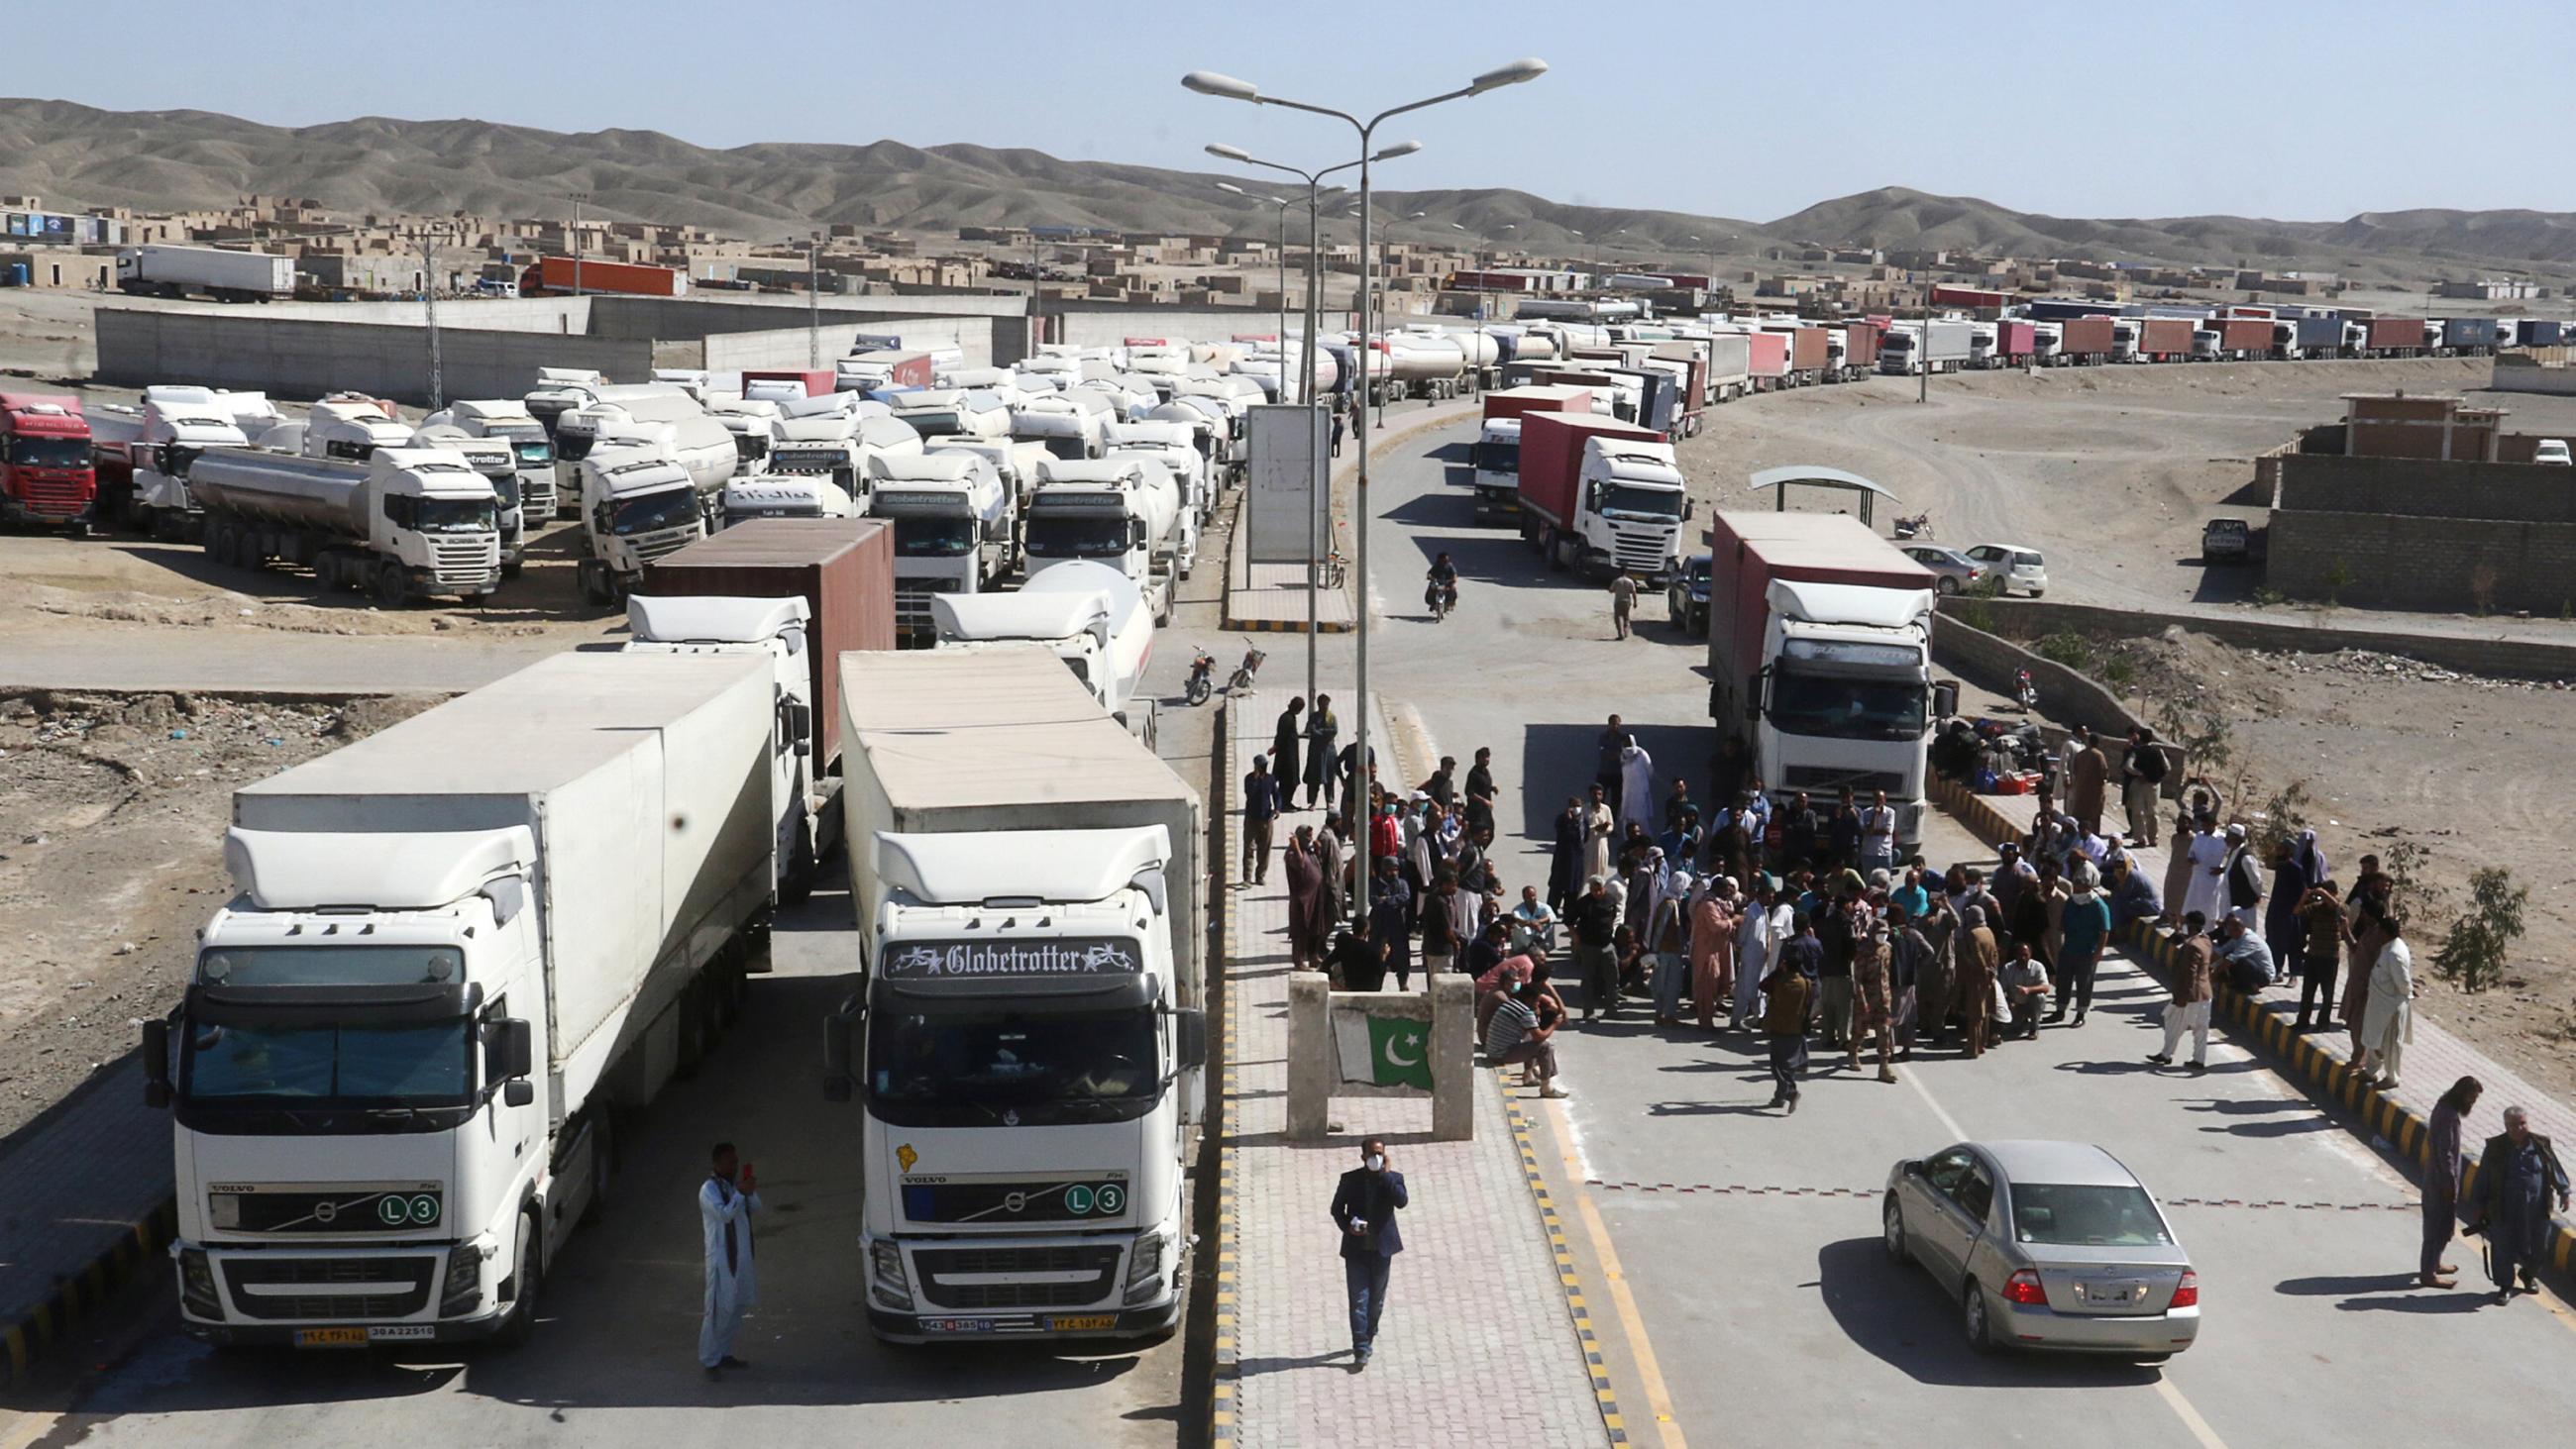 The photo shows the border crossing from a distance of several hundred yards away, showing a huge bottleneck of trucks parked waiting in a sparse landscape. 